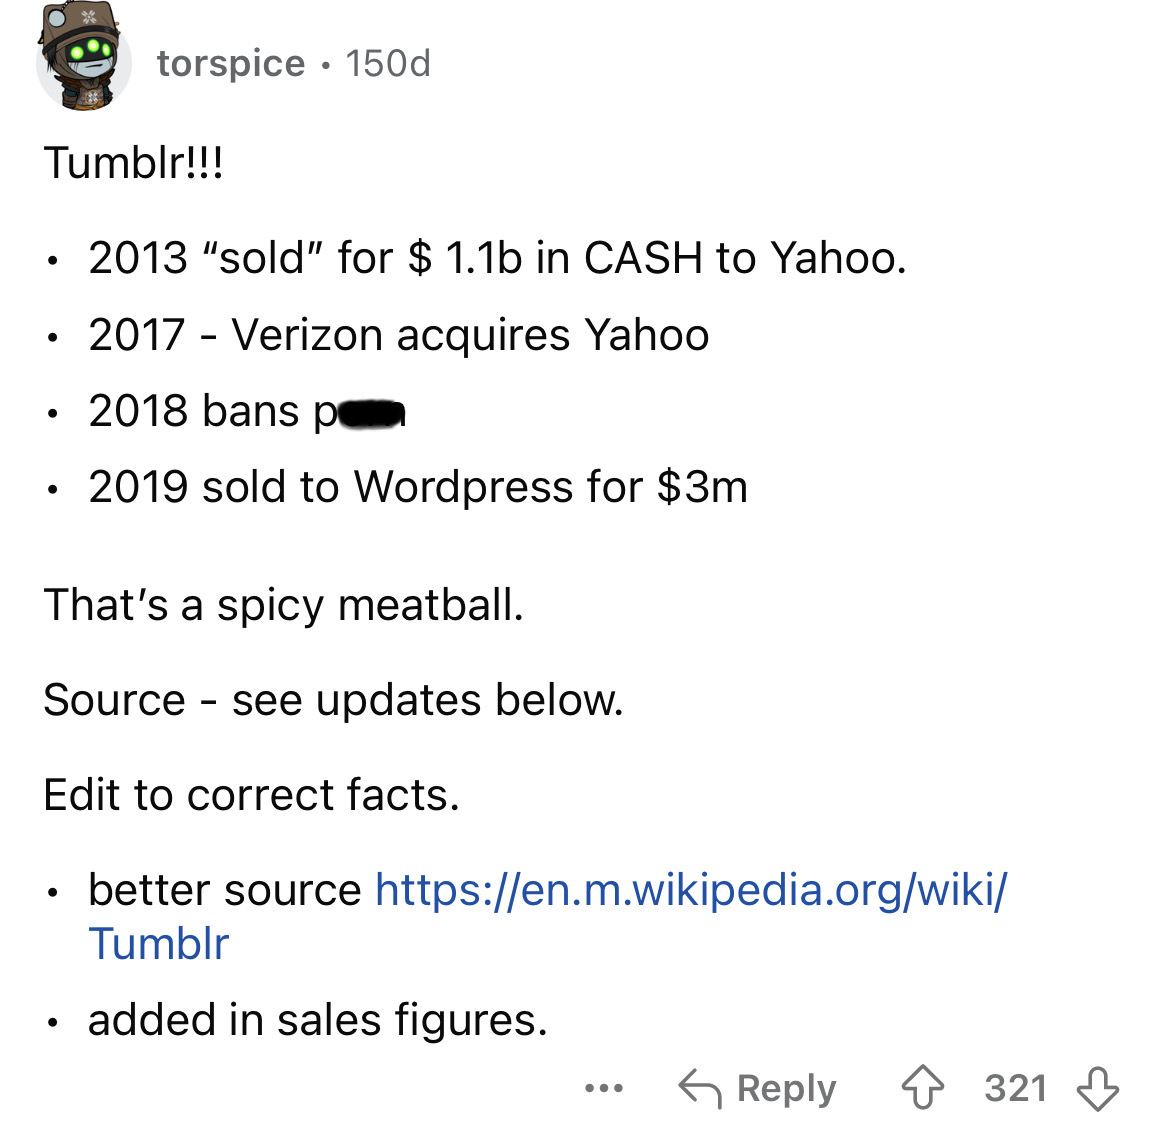 screenshot - torspice 150d Tumblr!!! 2013 "sold" for $ 1.1b in Cash to Yahoo. . 2017 Verizon acquires Yahoo 2018 bans p 2019 sold to Wordpress for $3m That's a spicy meatball. Source see updates below. Edit to correct facts. better source Tumblr added in 